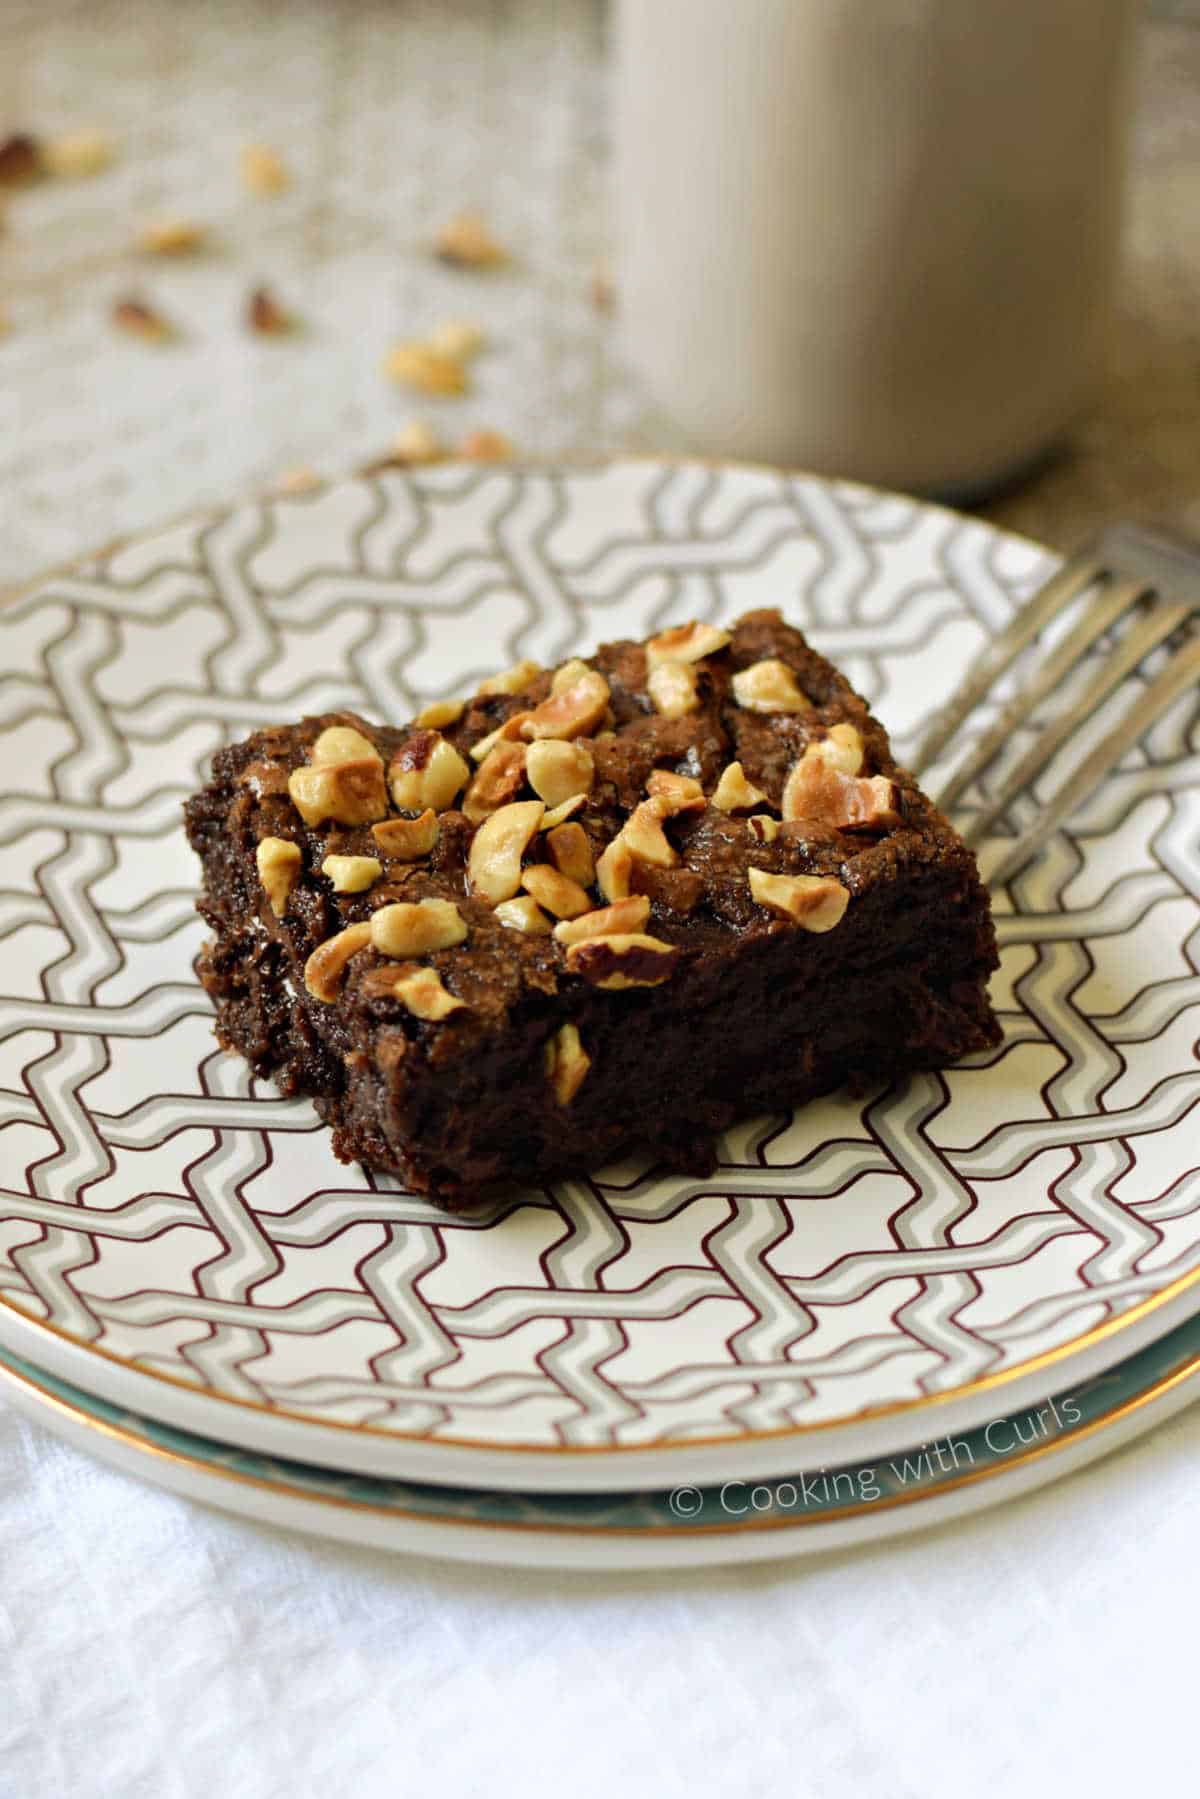 A hazelnut brownie on a stack of plates with a fork on the edge and glass of milk in the background.